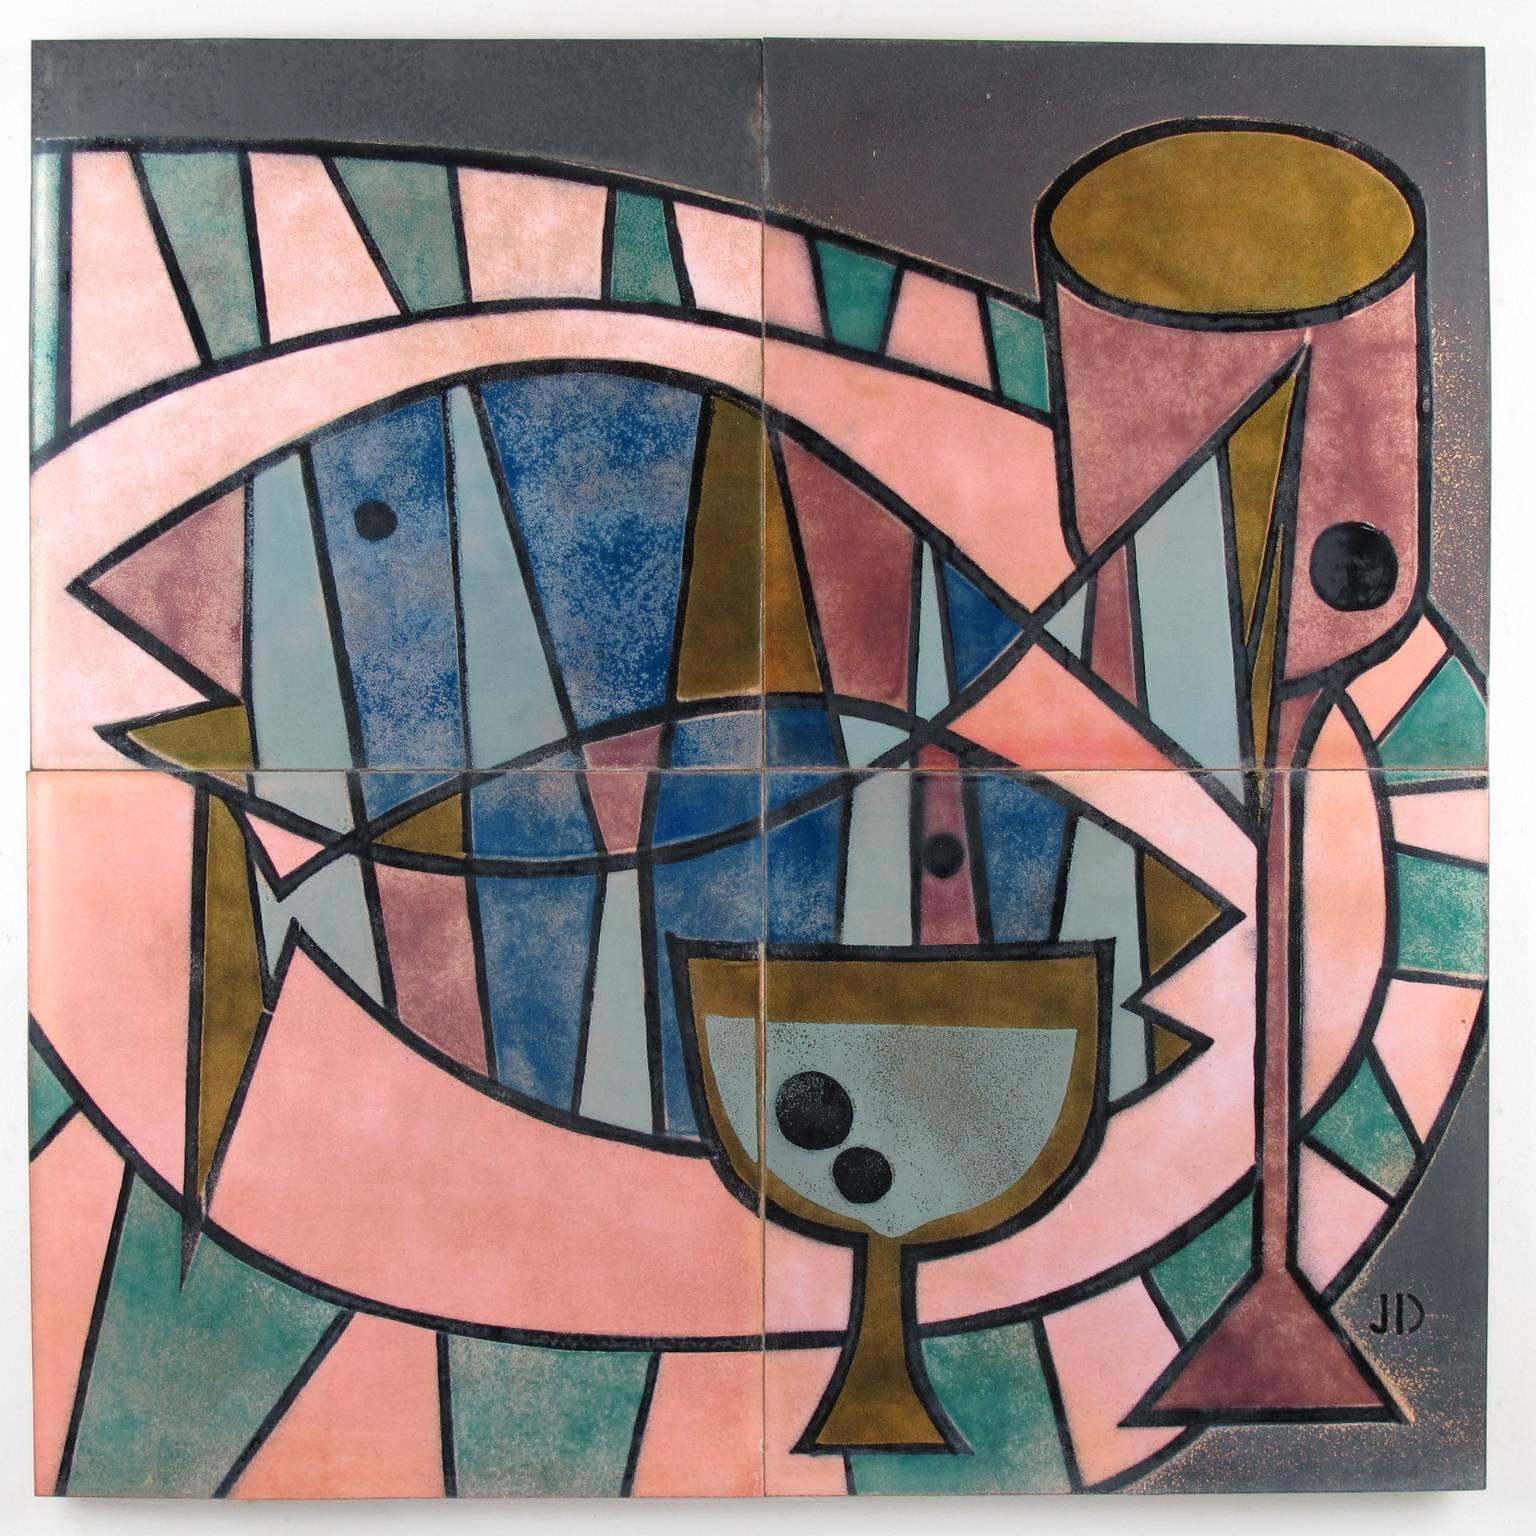 Gorgeous Mid-Century modernist enamel on copper artwork by Judith Daner. Four tile plaques mounted together on original shadow box wood frame with large white paper matte. Abstract and stylized design featuring still life, fish, plates and glasses,